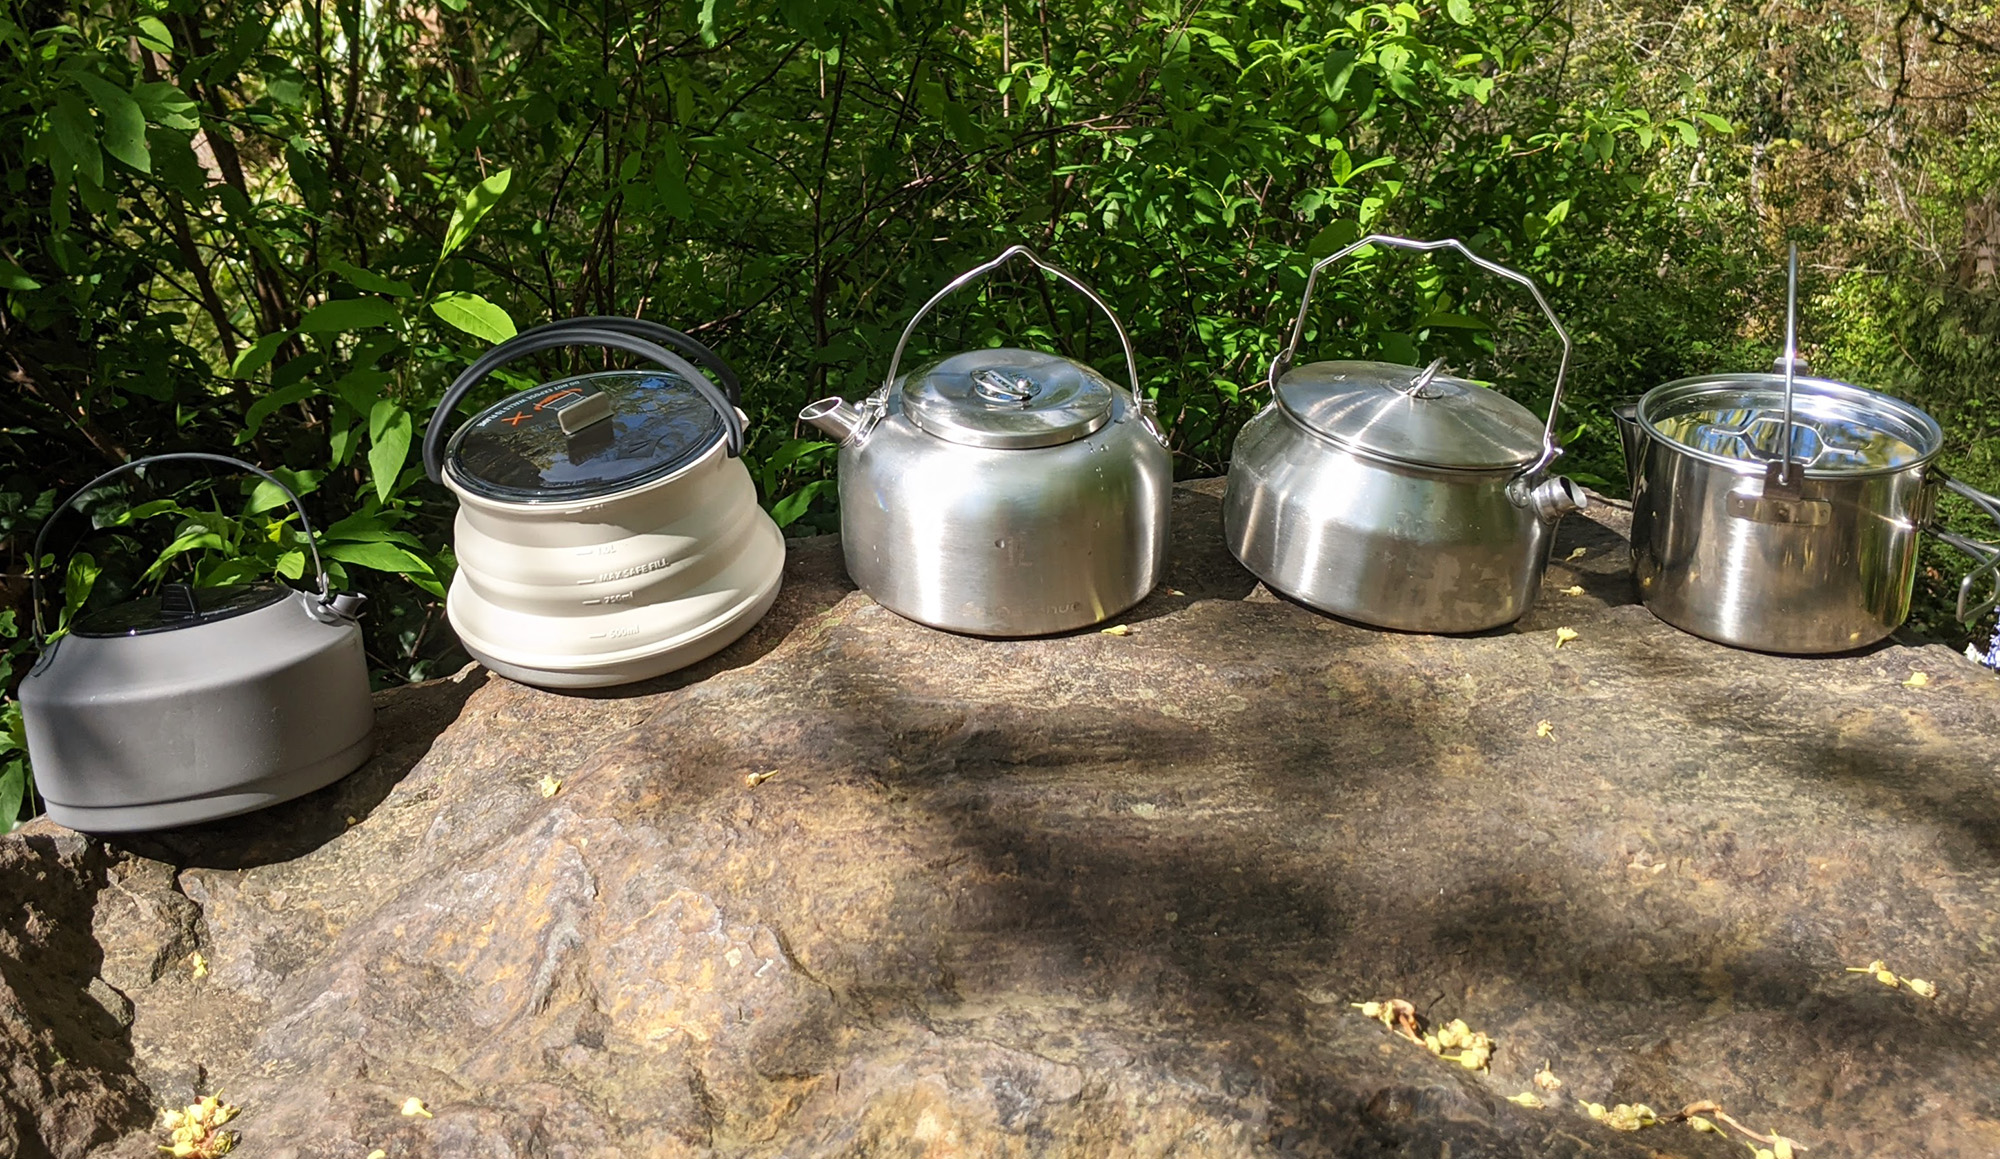 The best camping kettles make boiling water or other things easier when you’re camping in the backcountry.